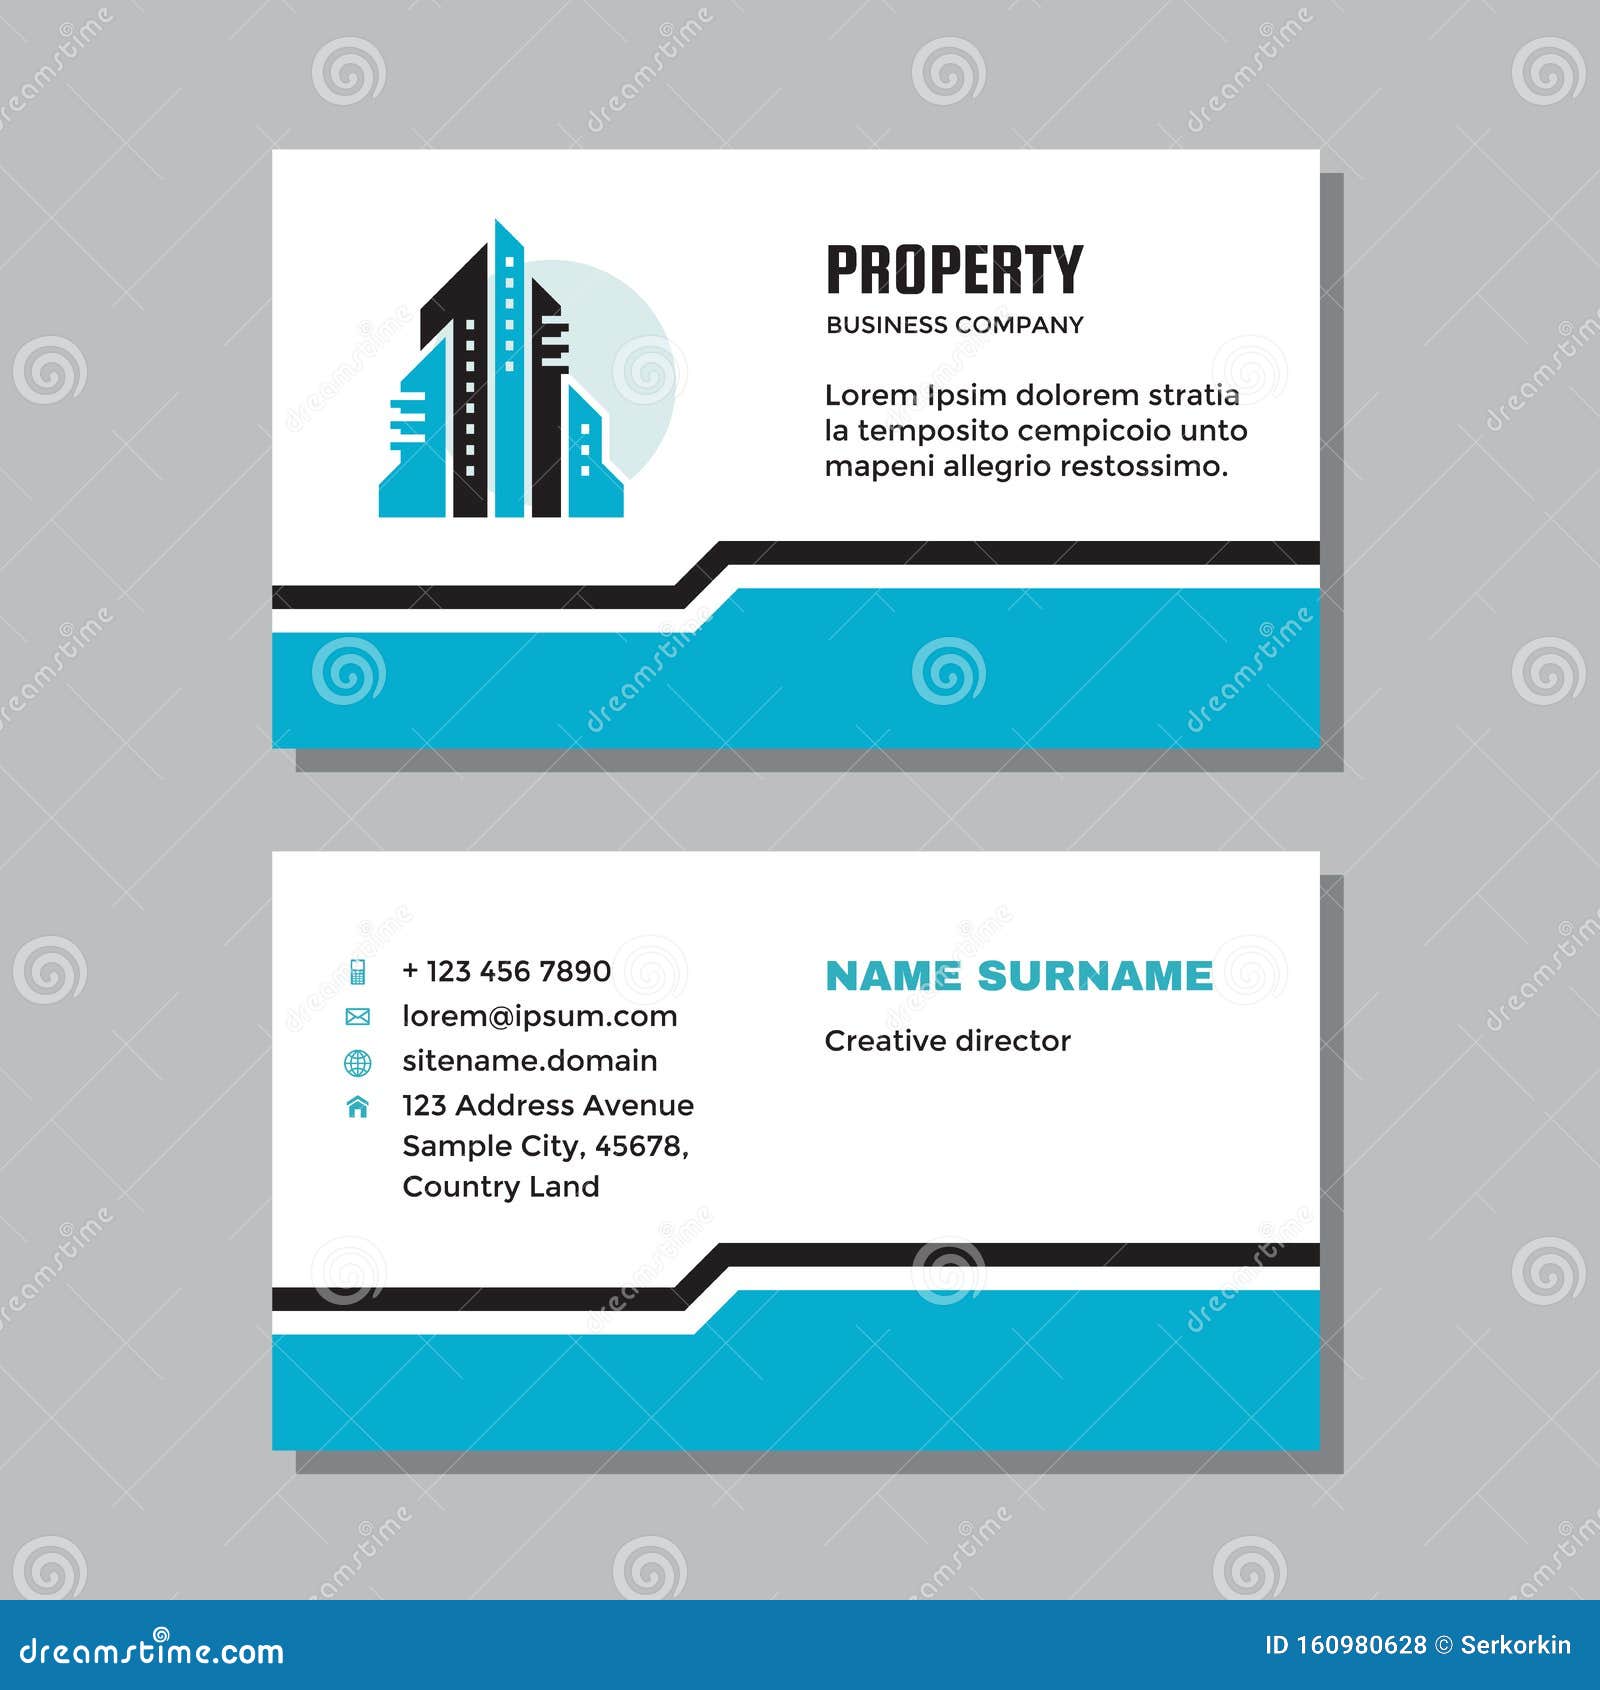 Business Visit Card Template with Logo - Concept Design. Real Regarding Real Estate Business Cards Templates Free